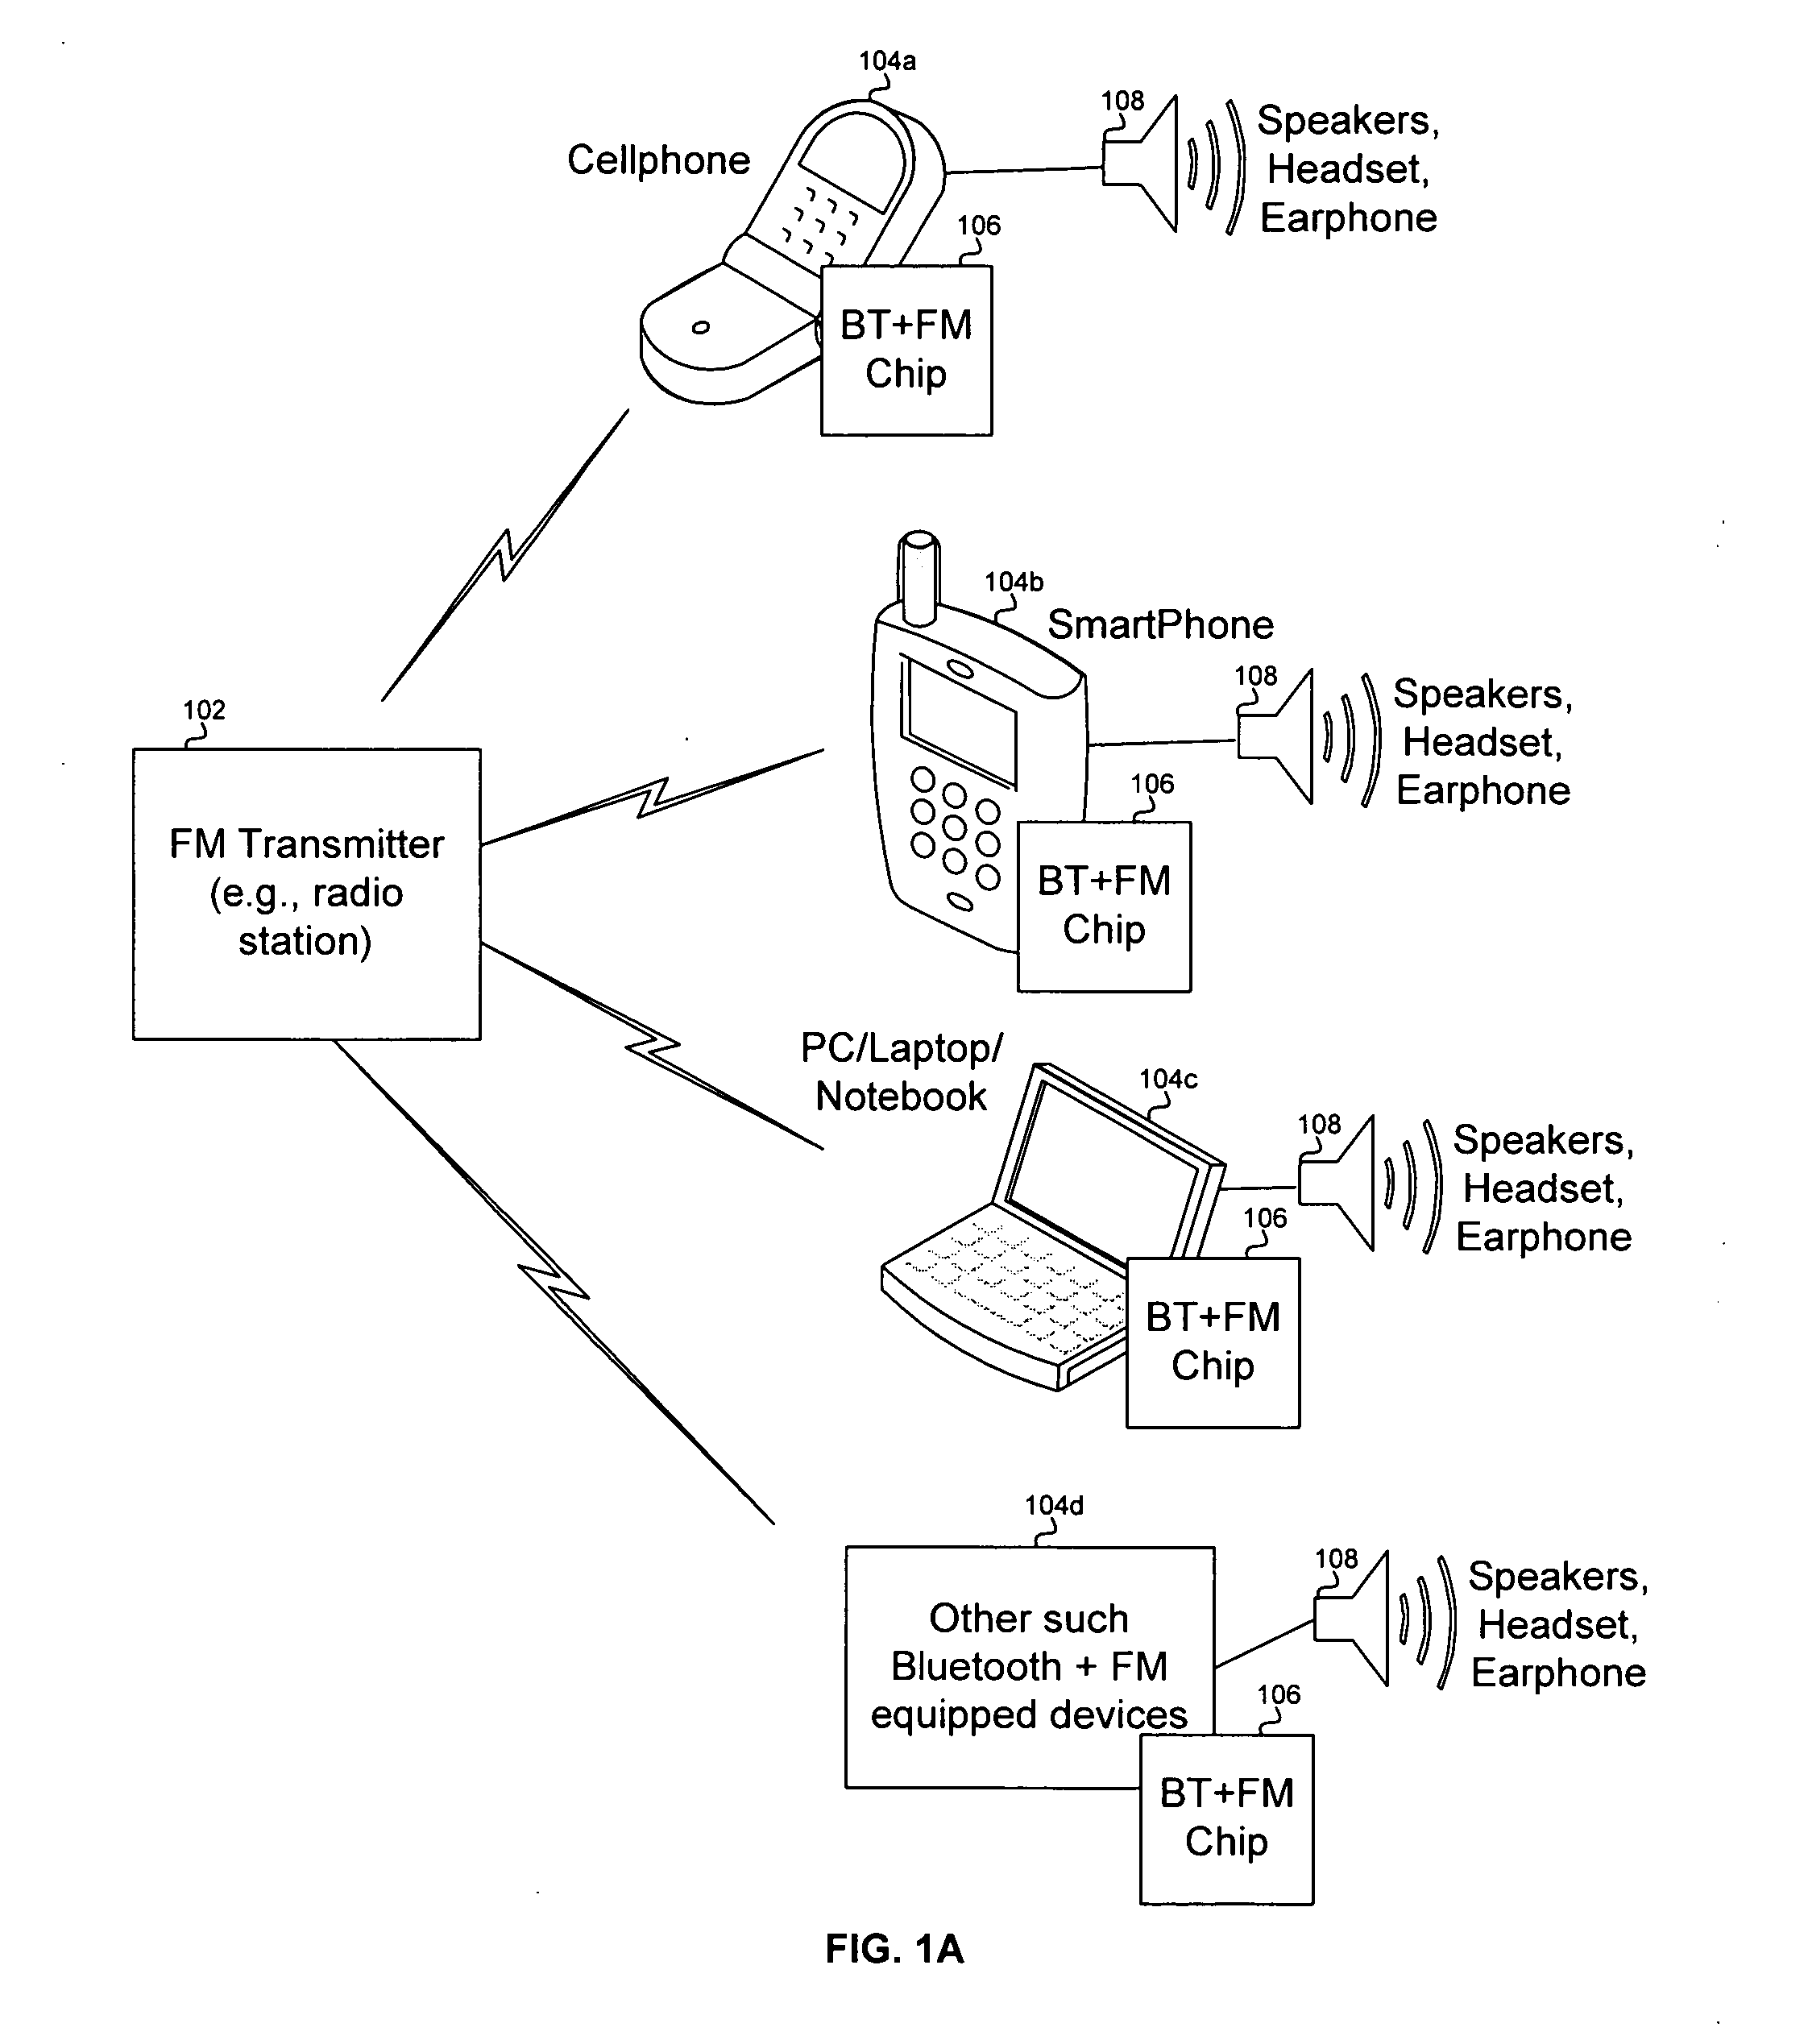 Method and system for a single chip integrated Bluetooth and FM transceiver and baseband processor